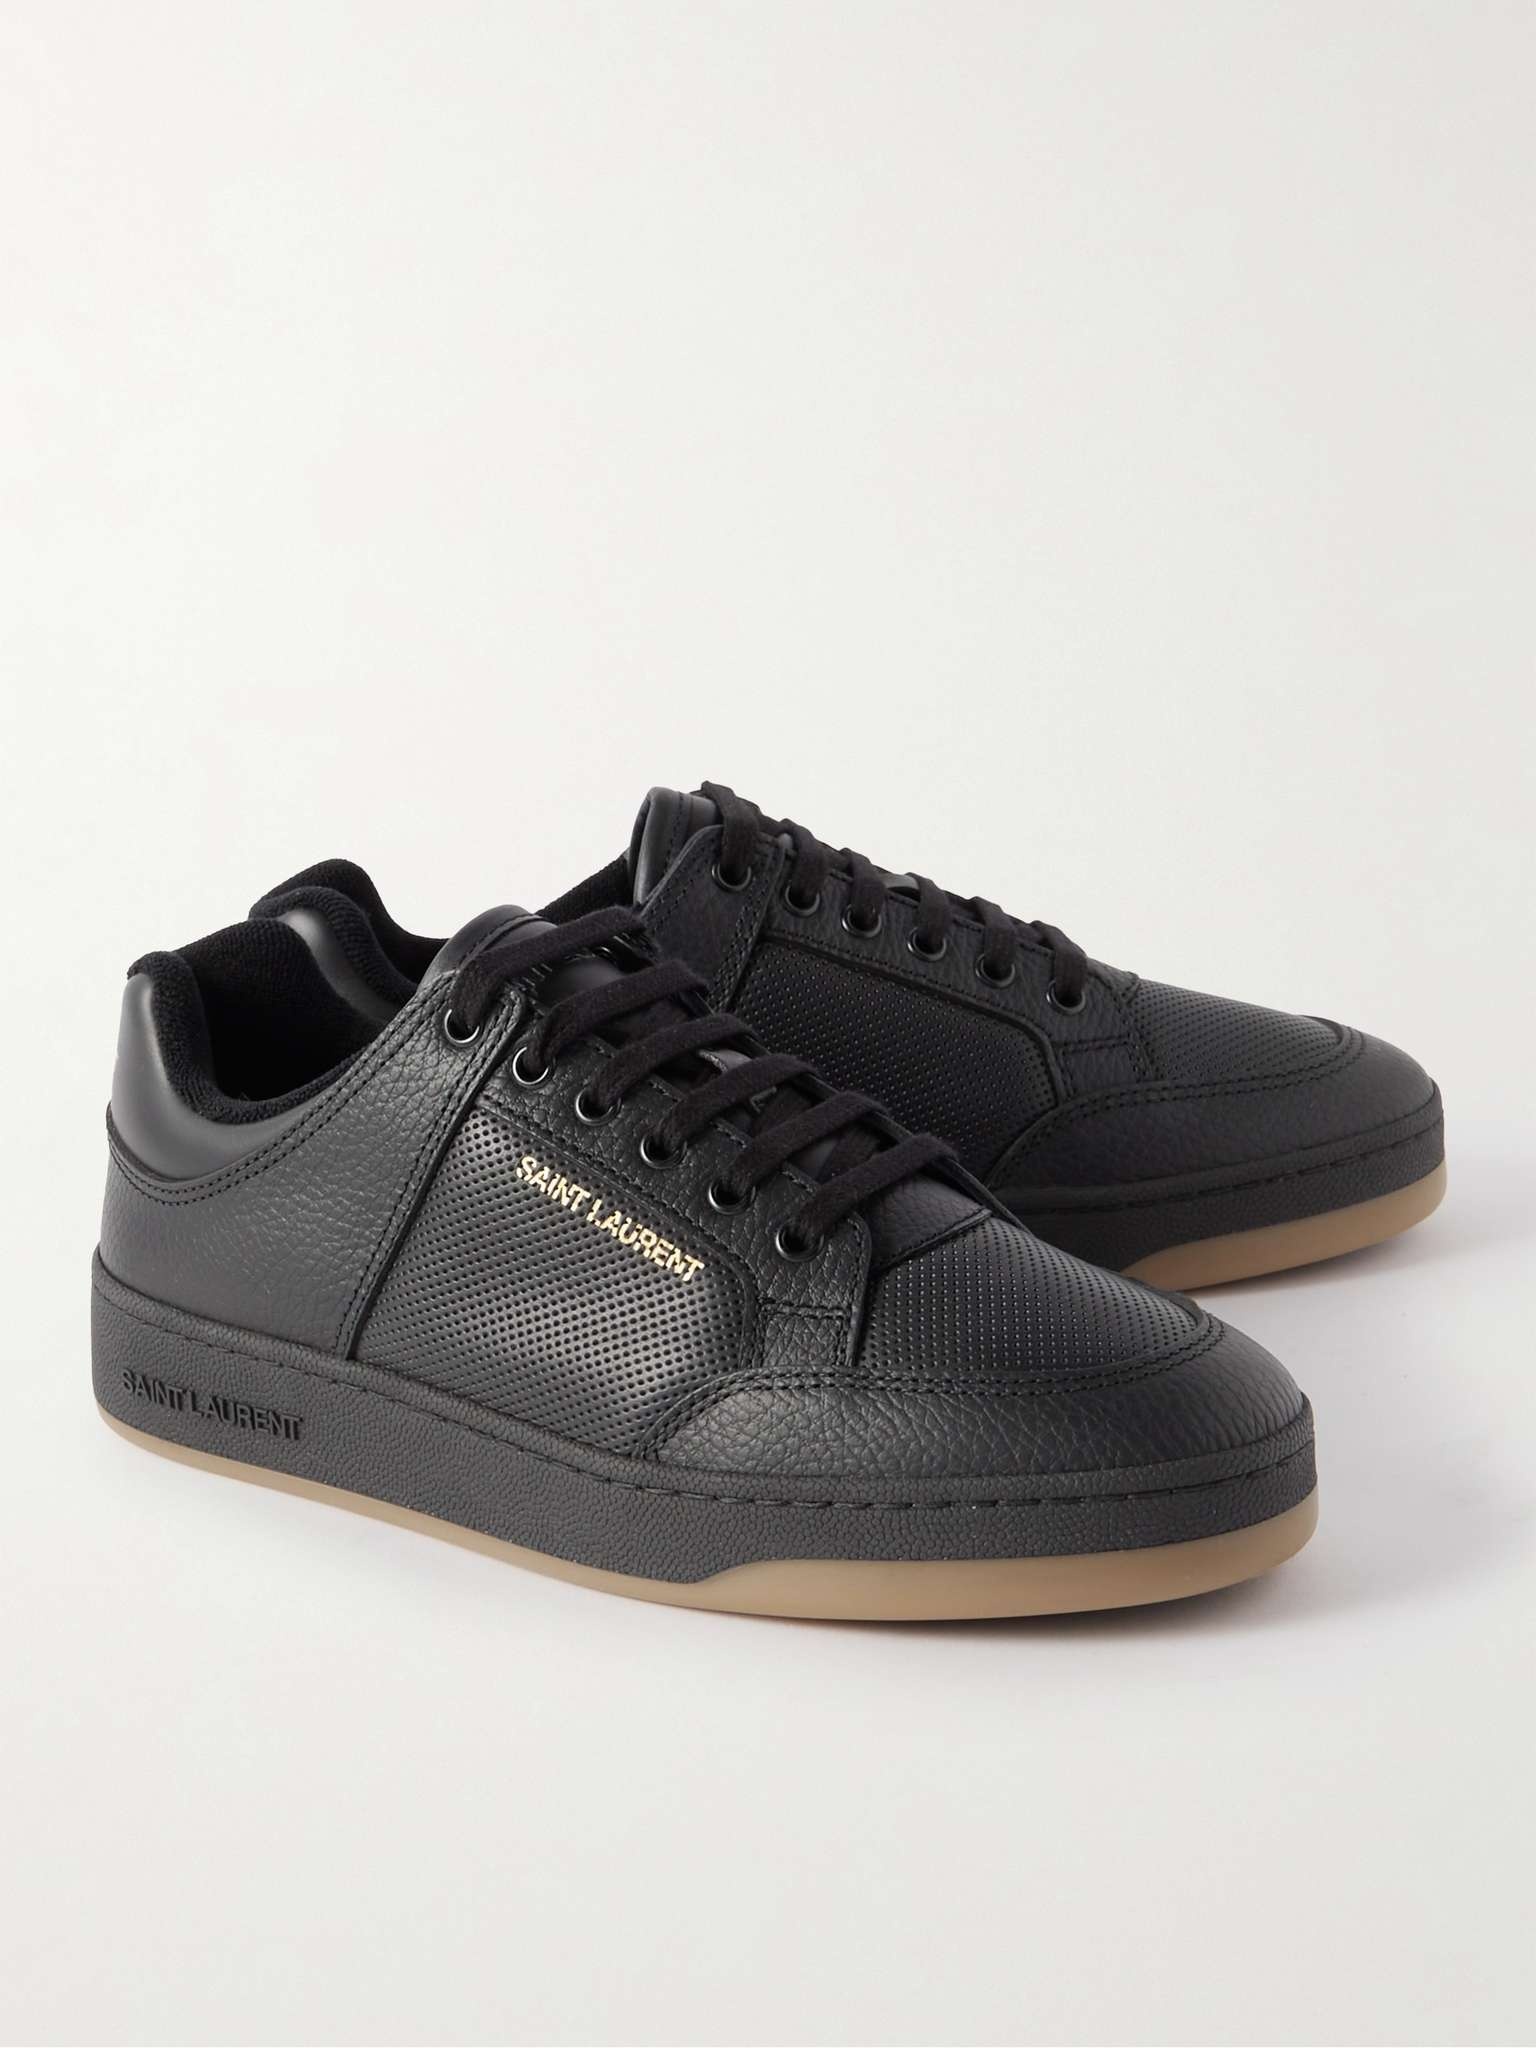 SL/61 Perforated Leather Sneakers - 4